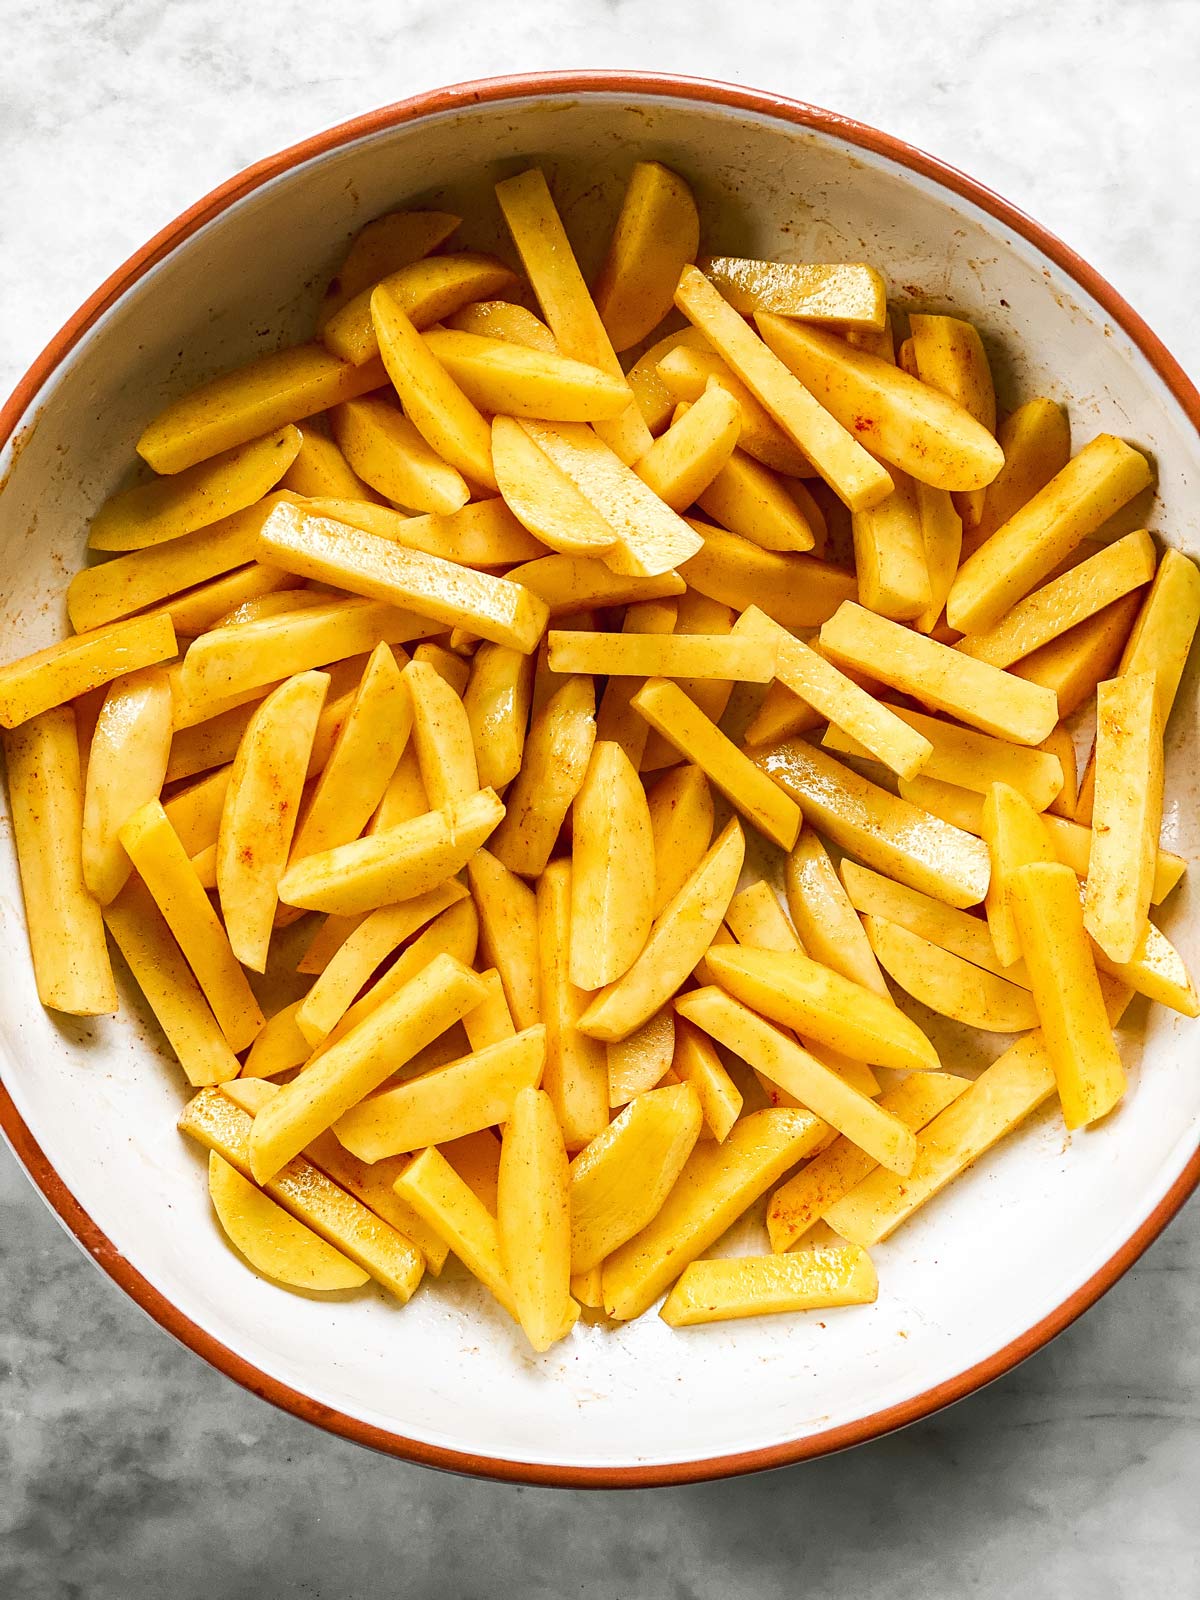 seasoned potatoes sliced into fries in large white bowl